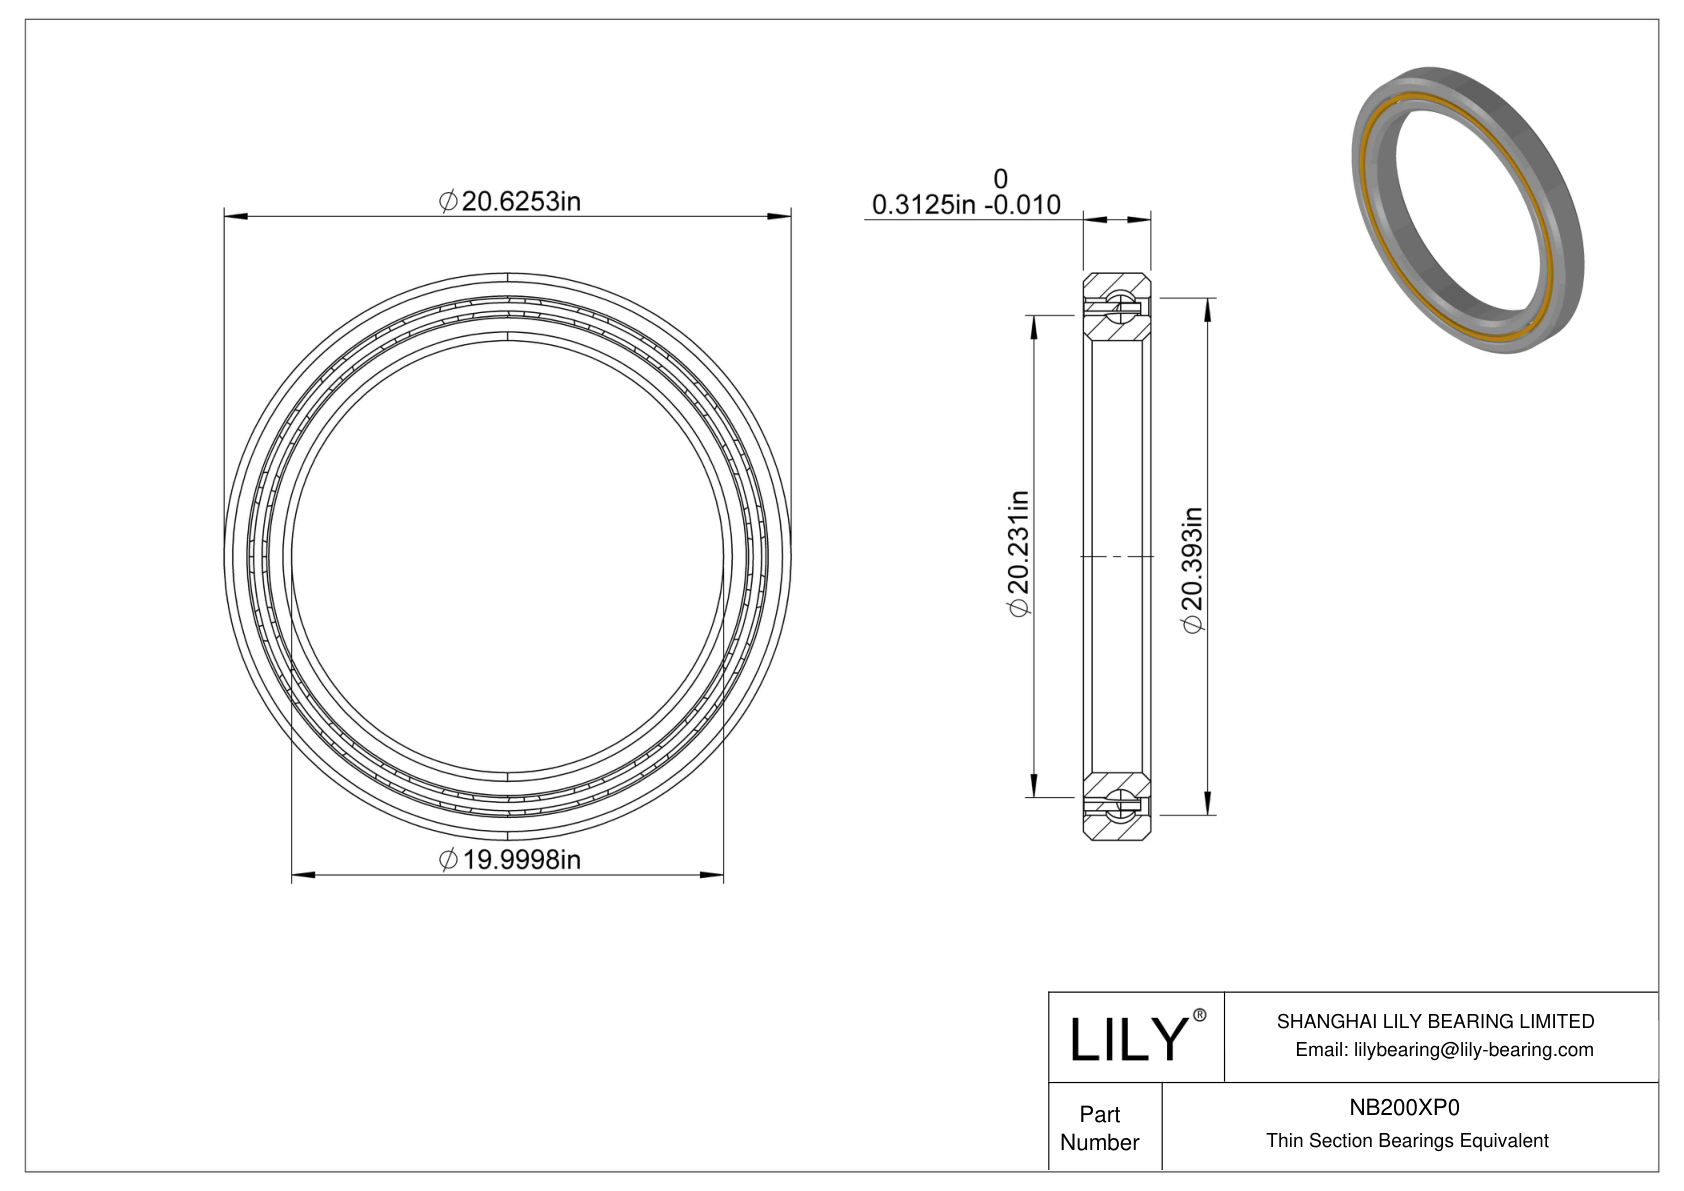 NB200XP0 Constant Section (CS) Bearings cad drawing